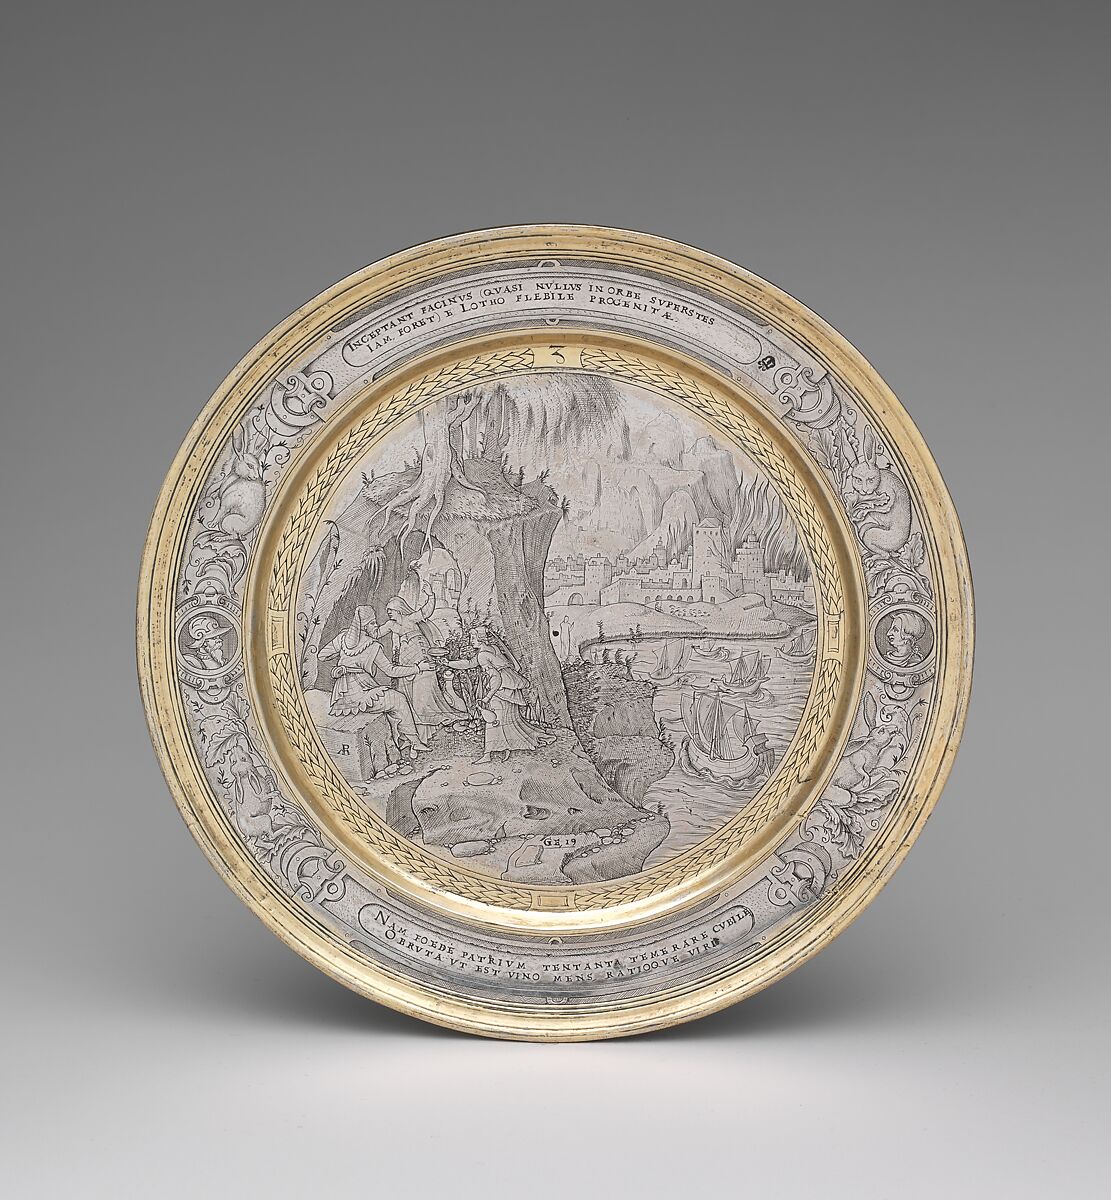 Lot Seduced by his Daughters, Possibly engraved by P.M., Silver, partly gilded, probably British 